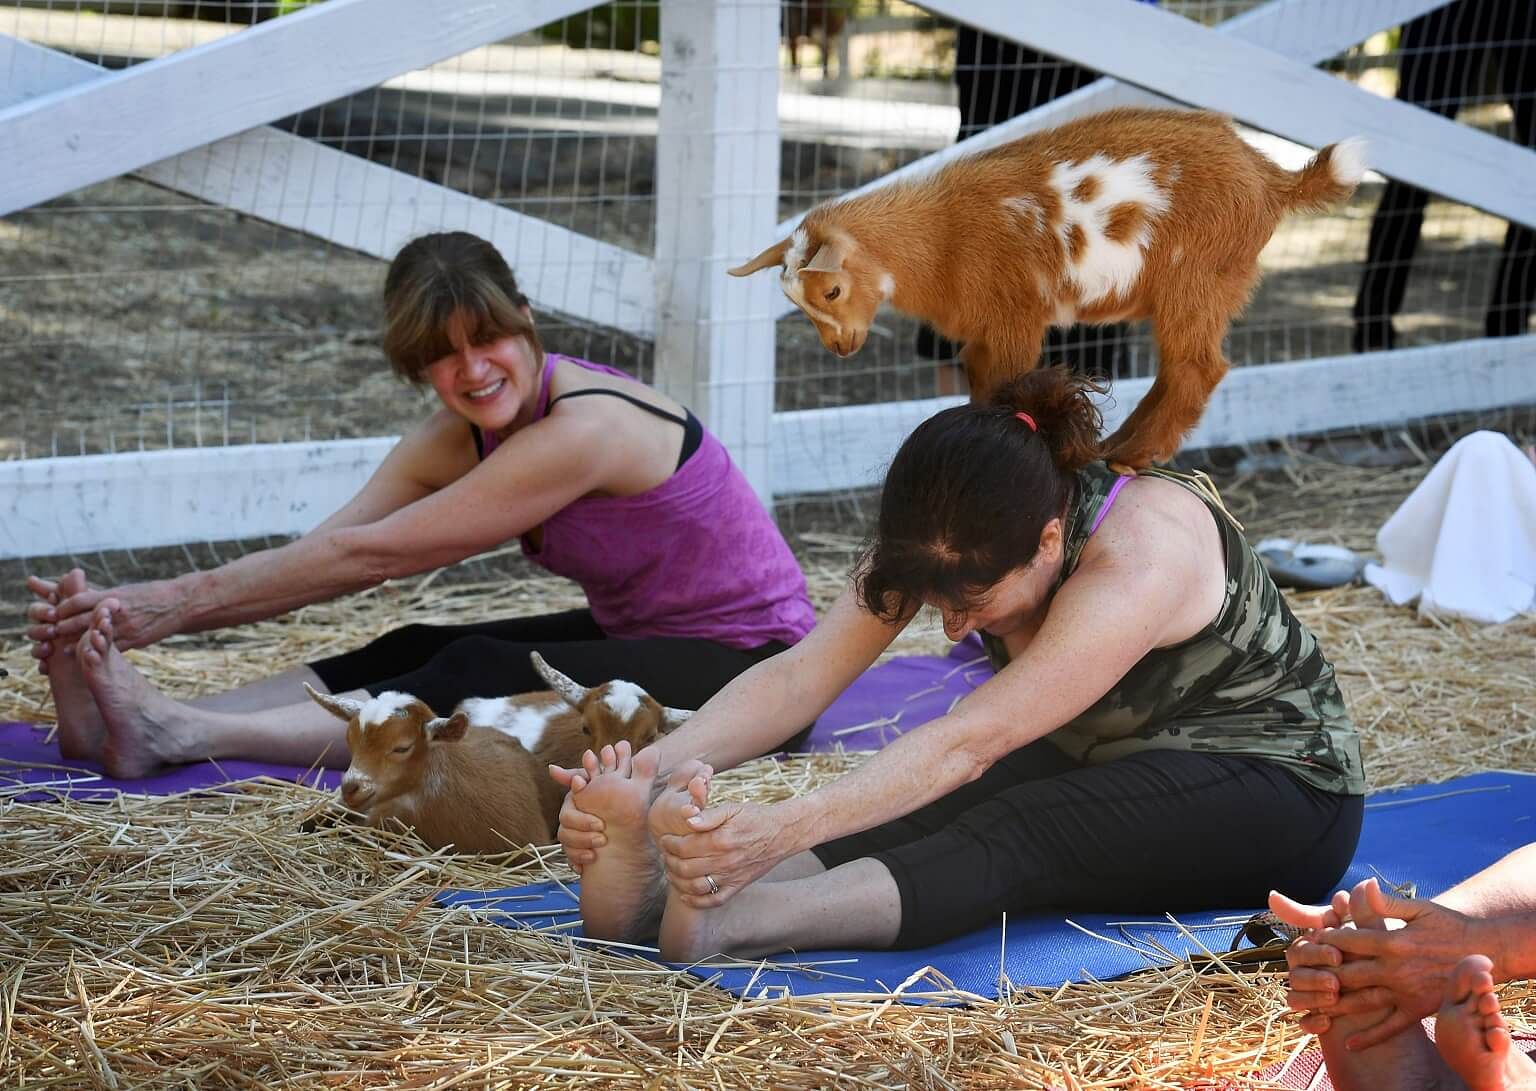 Yoga with goats craze takes off in US